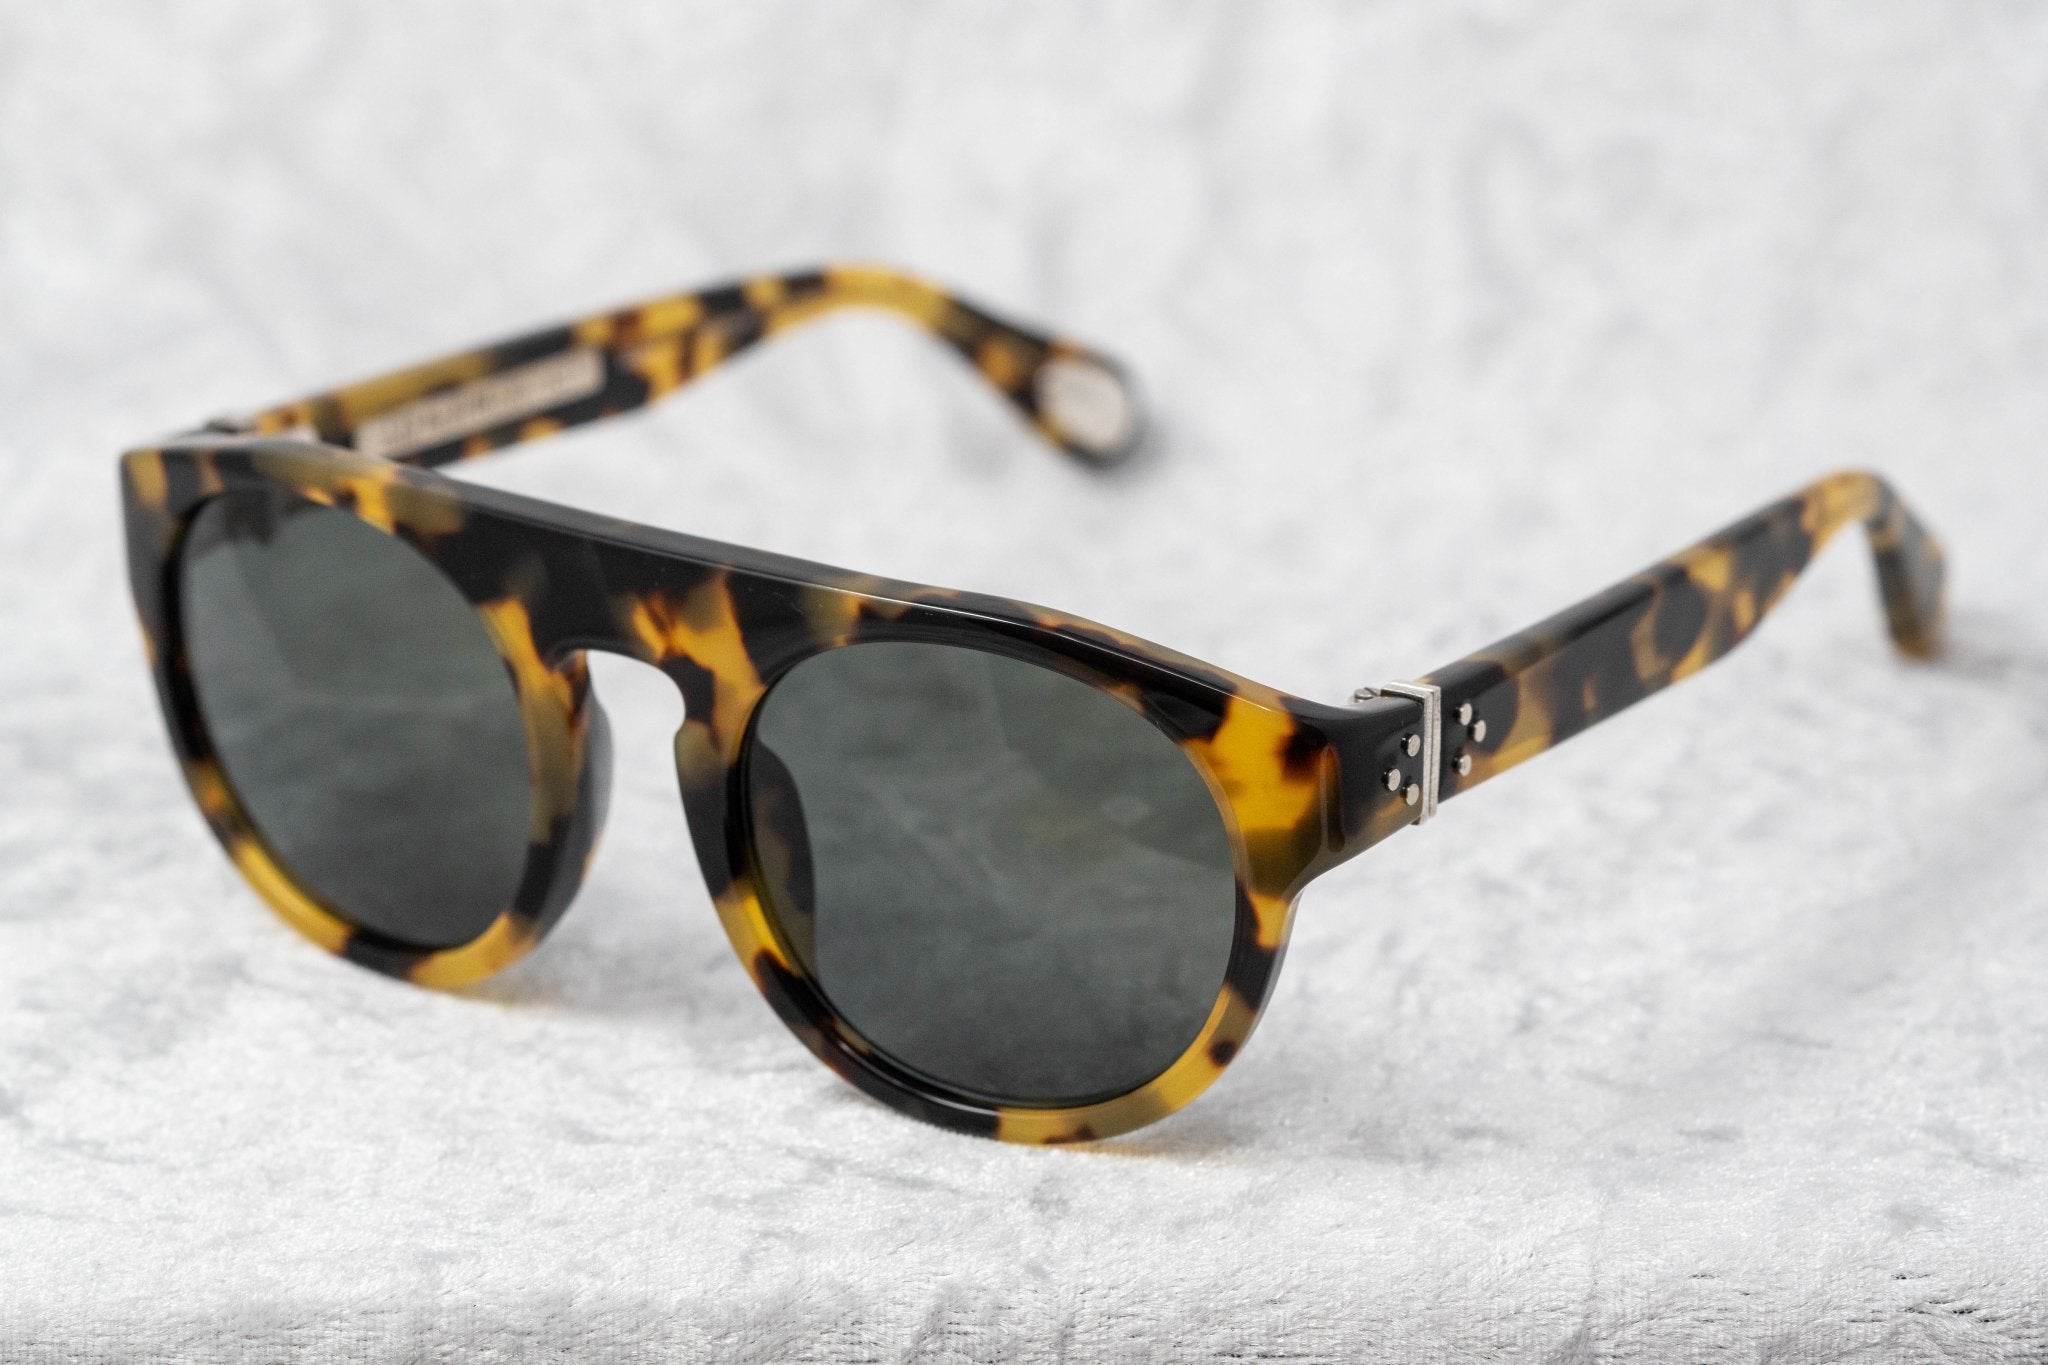 Ann Demeulemeester Sunglasses Flat Top Tortoise Shell 925 Silver with Grey Lenses Category 3 AD10C2SUN - Watches & Crystals